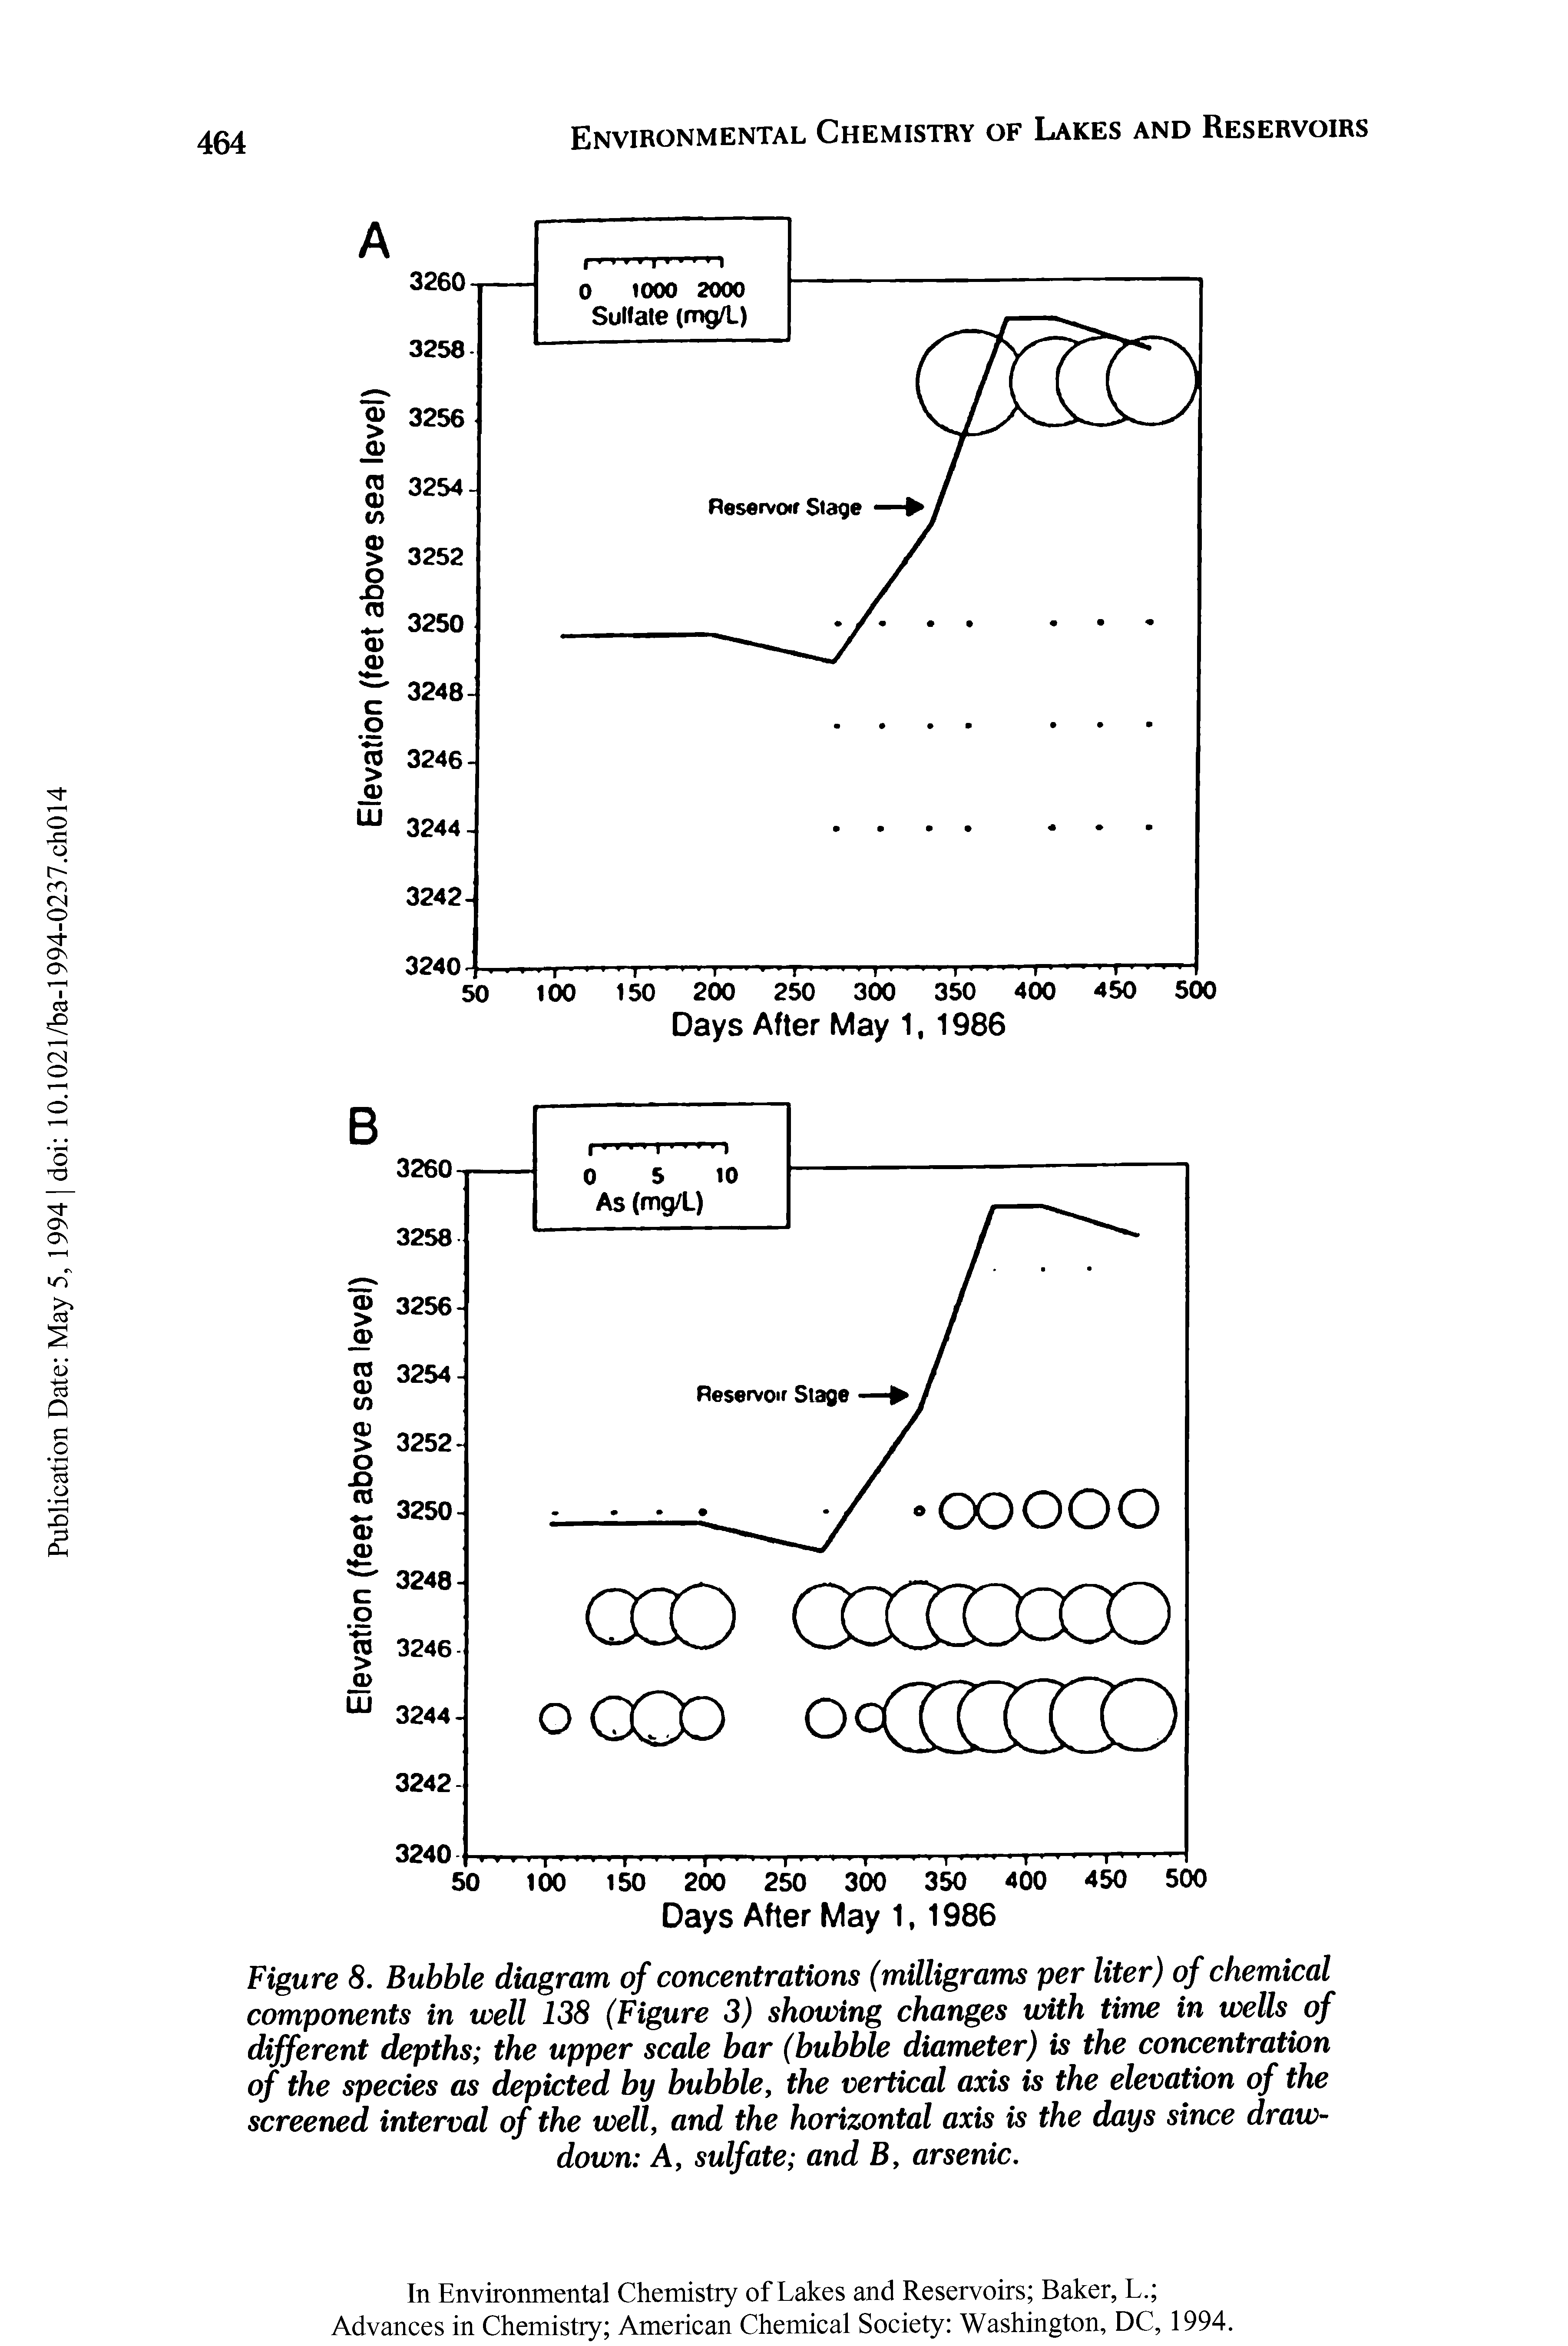 Figure 8. Bubble diagram of concentrations (milligrams per liter) of chemical components in well 138 (Figure 3) showing changes with time in wells of different depths the upper scale bar (bubble diameter) is the concentration of the species as depicted by bubble, the vertical axis is the elevation of the screened interval of the well, and the horizontal axis is the days since drawdown A, sulfate and B, arsenic.